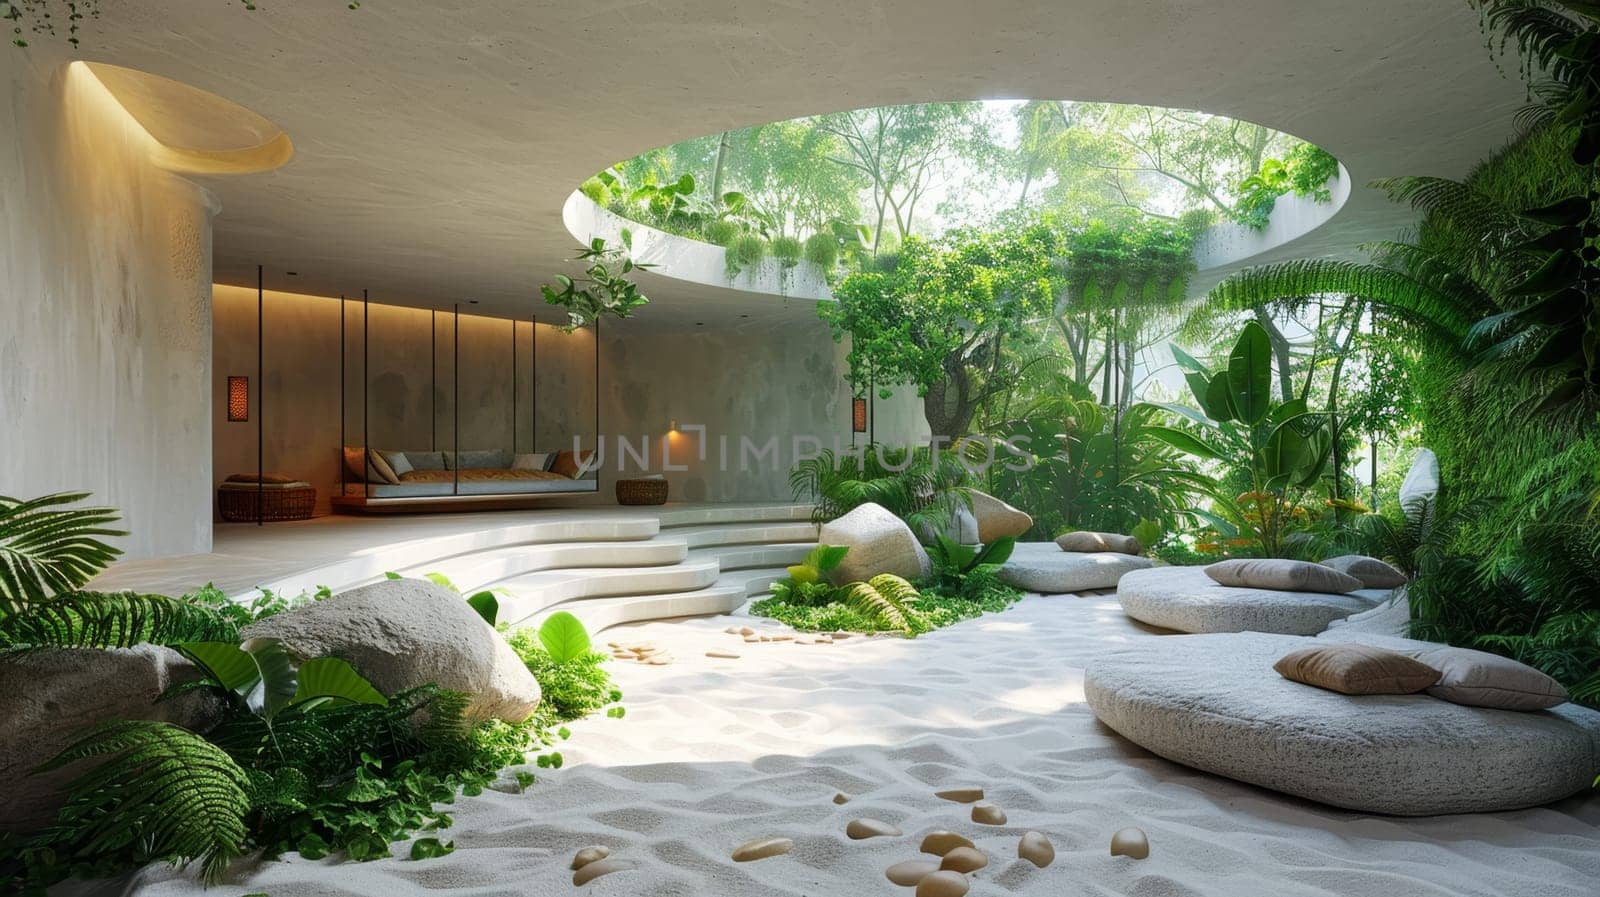 A modern interior in a house in nature. Environmental design by Lobachad